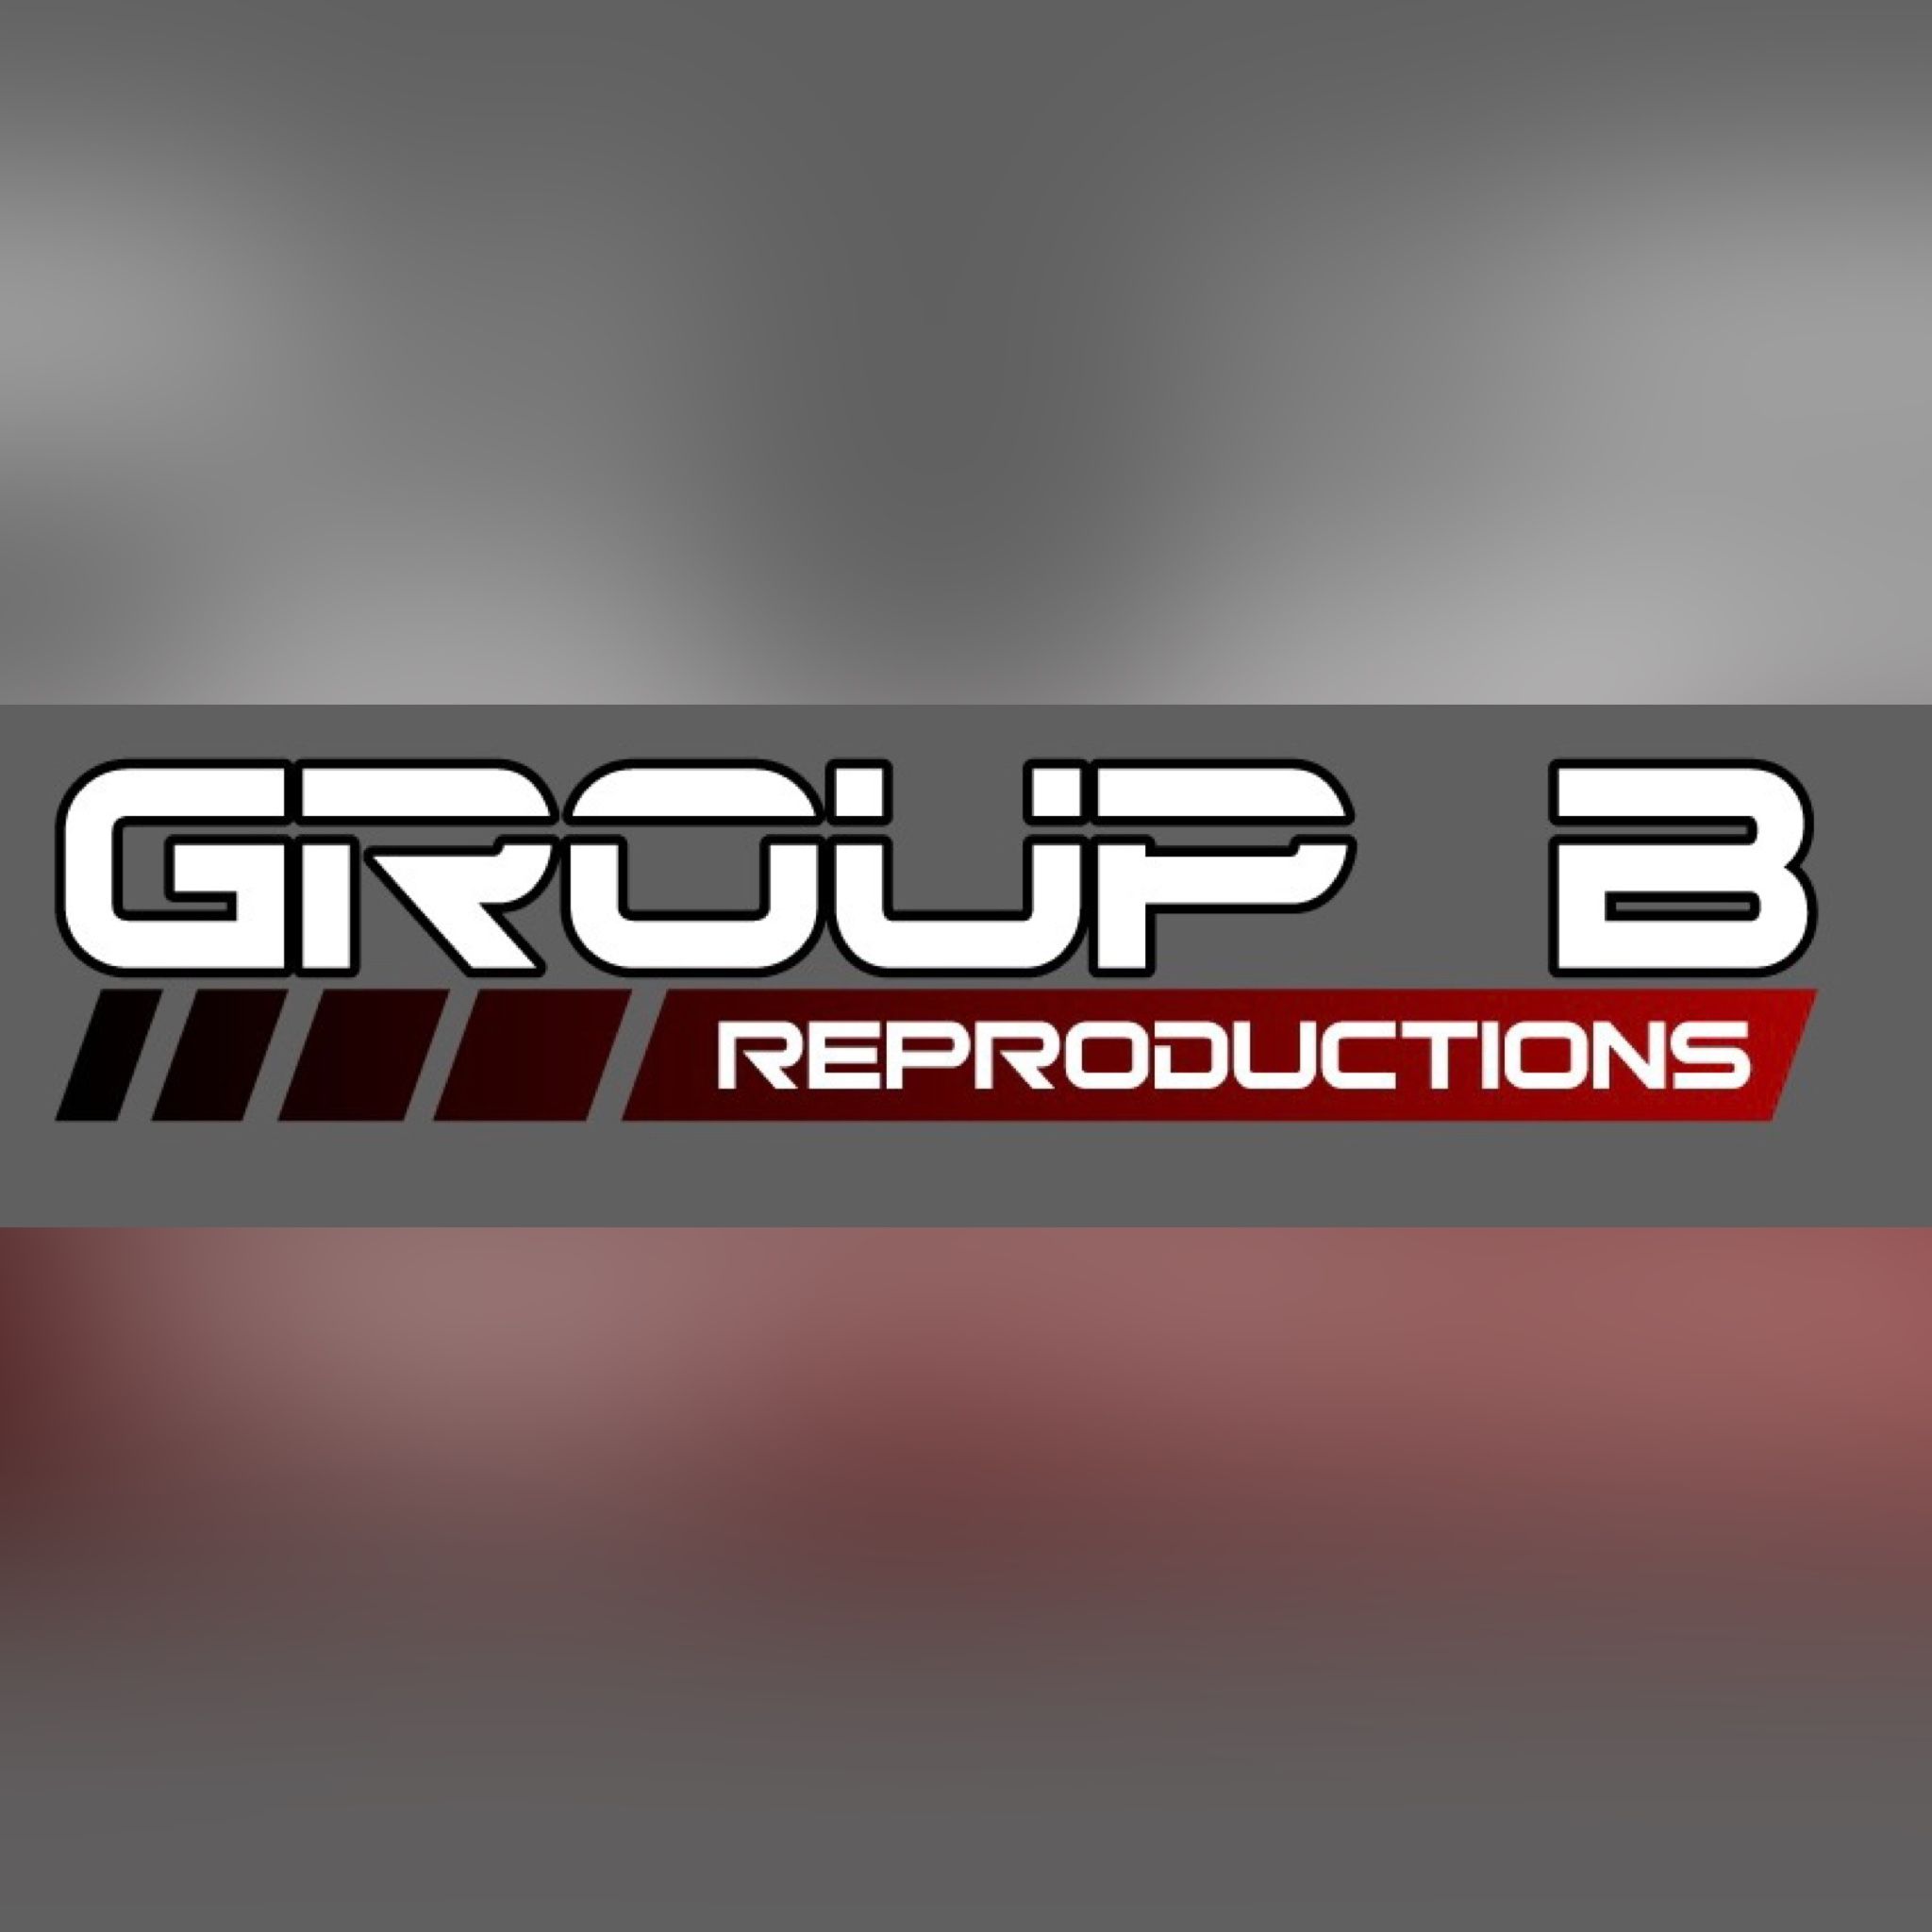 Group b reproductions